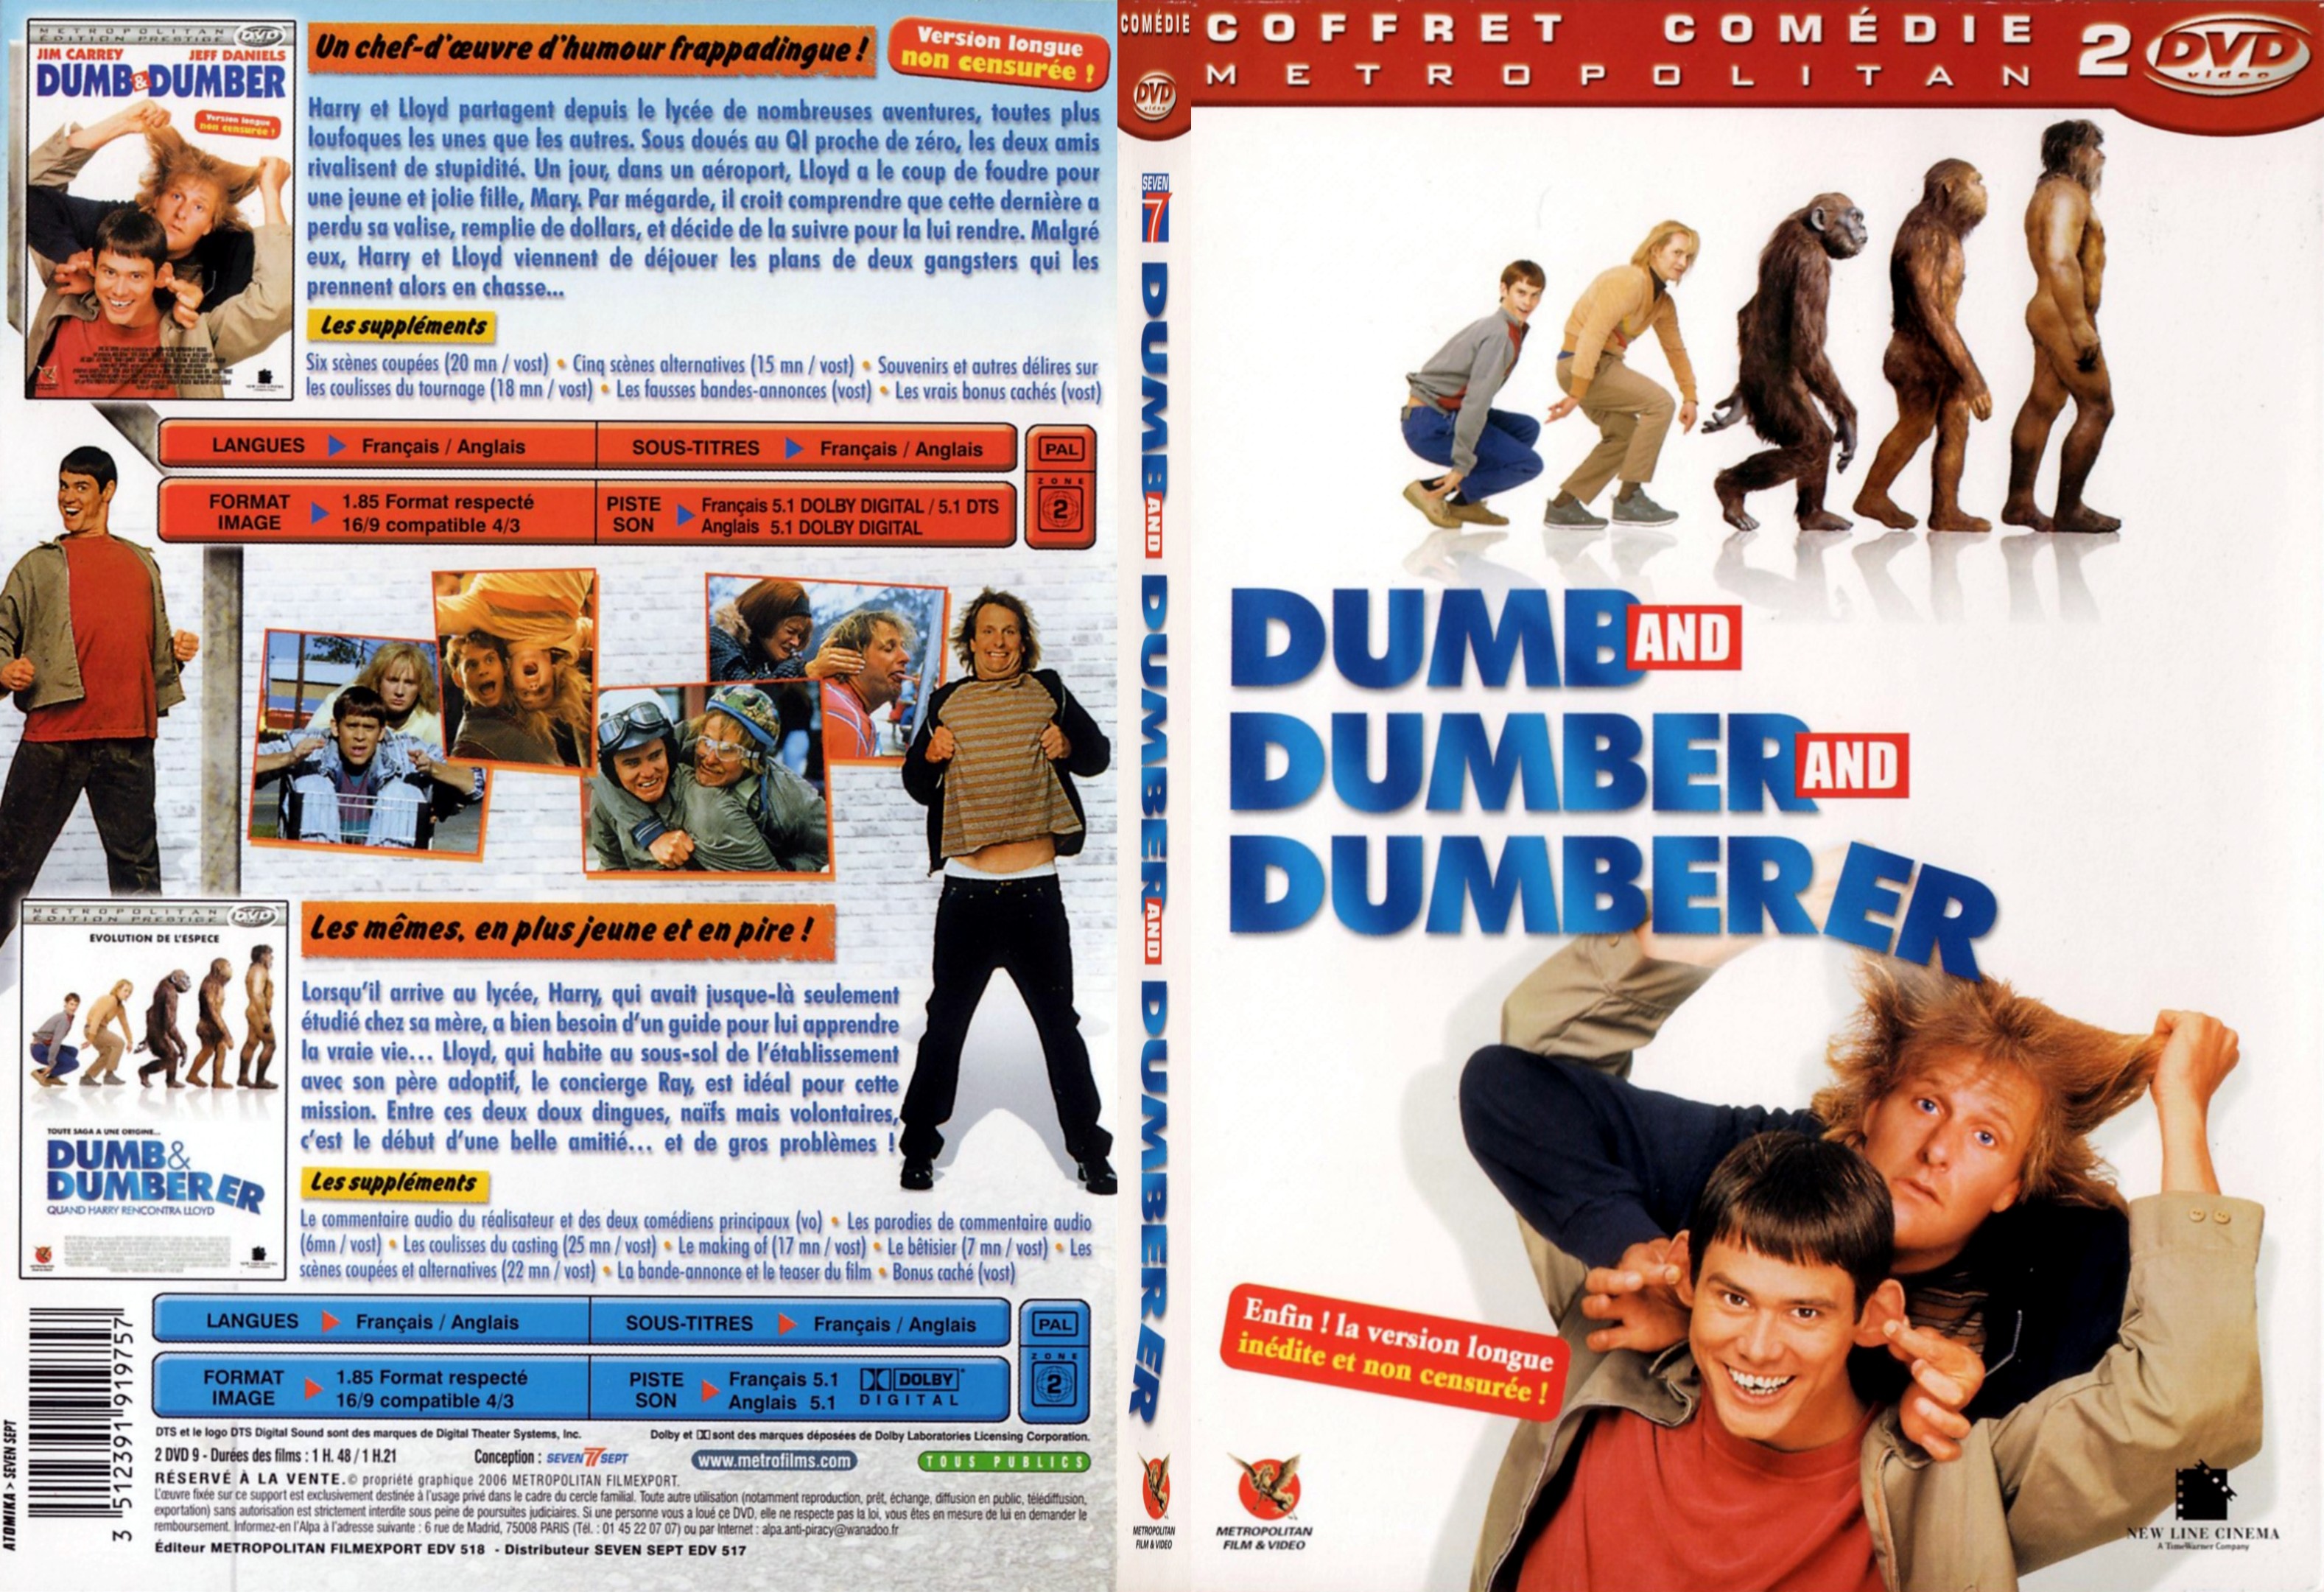 Jaquette DVD Dund and dumber and dumberer - SLIM